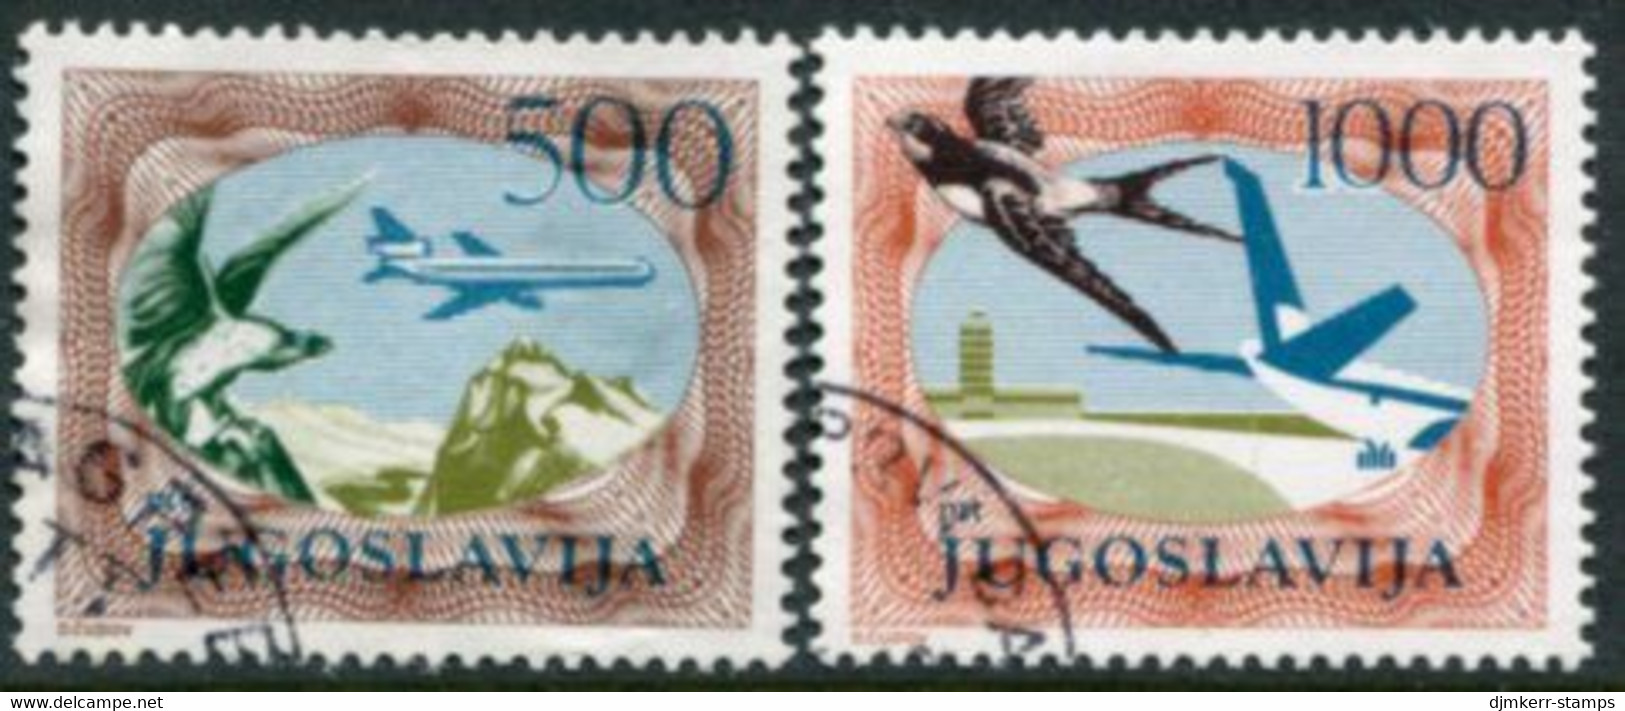 YUGOSLAVIA 1985 Airmail Definitive Perforated 12½ Used.  Michel 2098-99A - Used Stamps